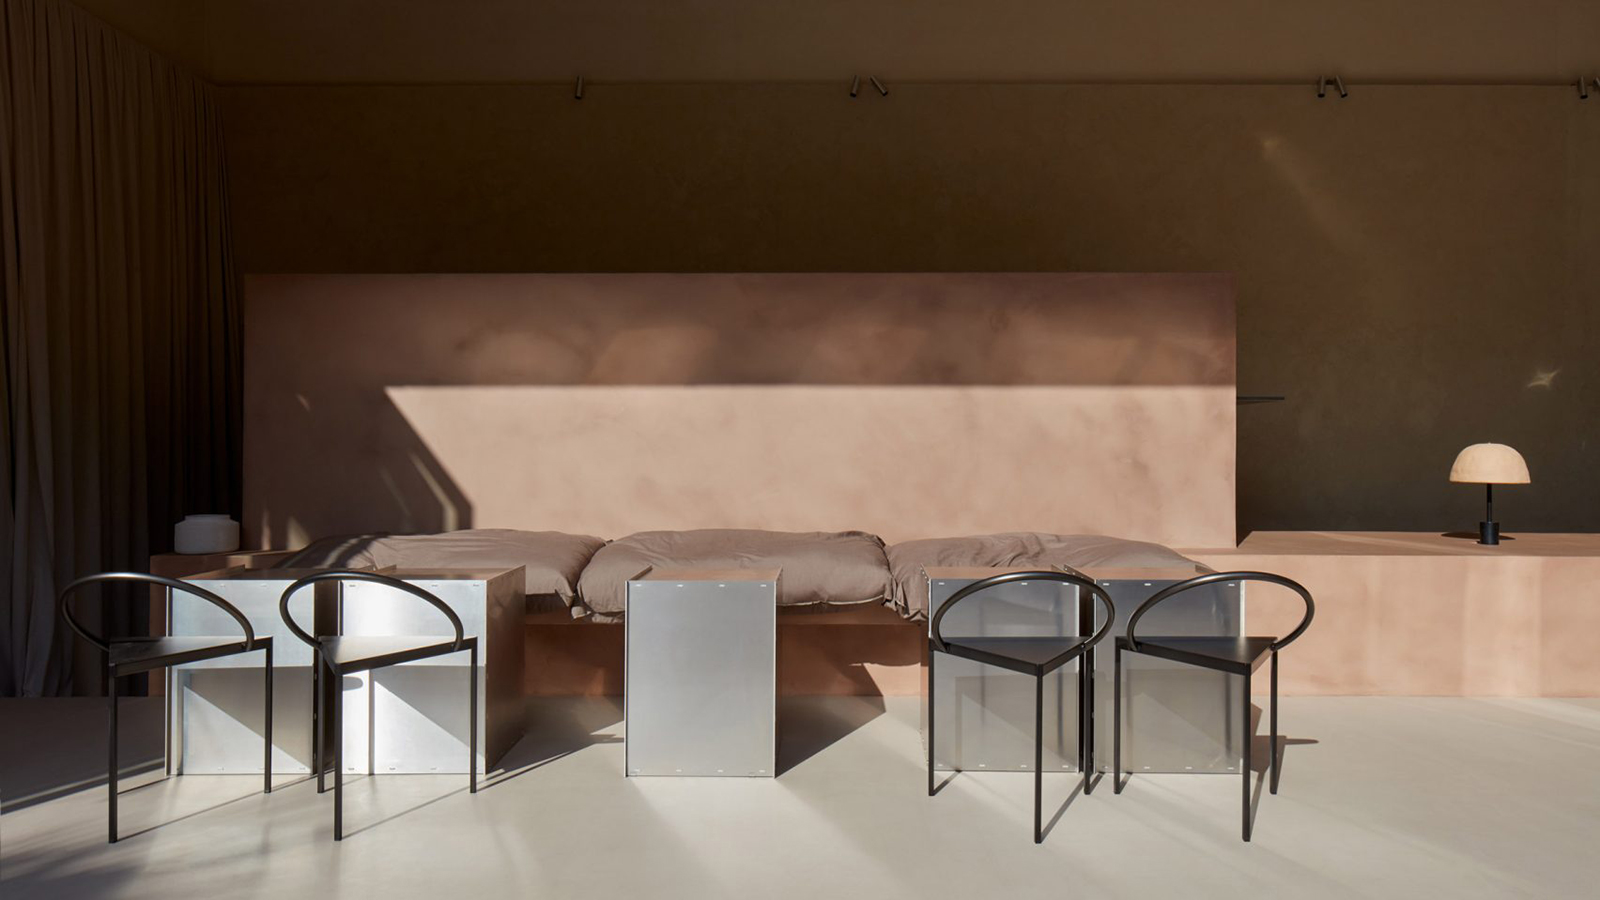 Abu Dhabi’s La Petite cafe is all about the rugged minimalism